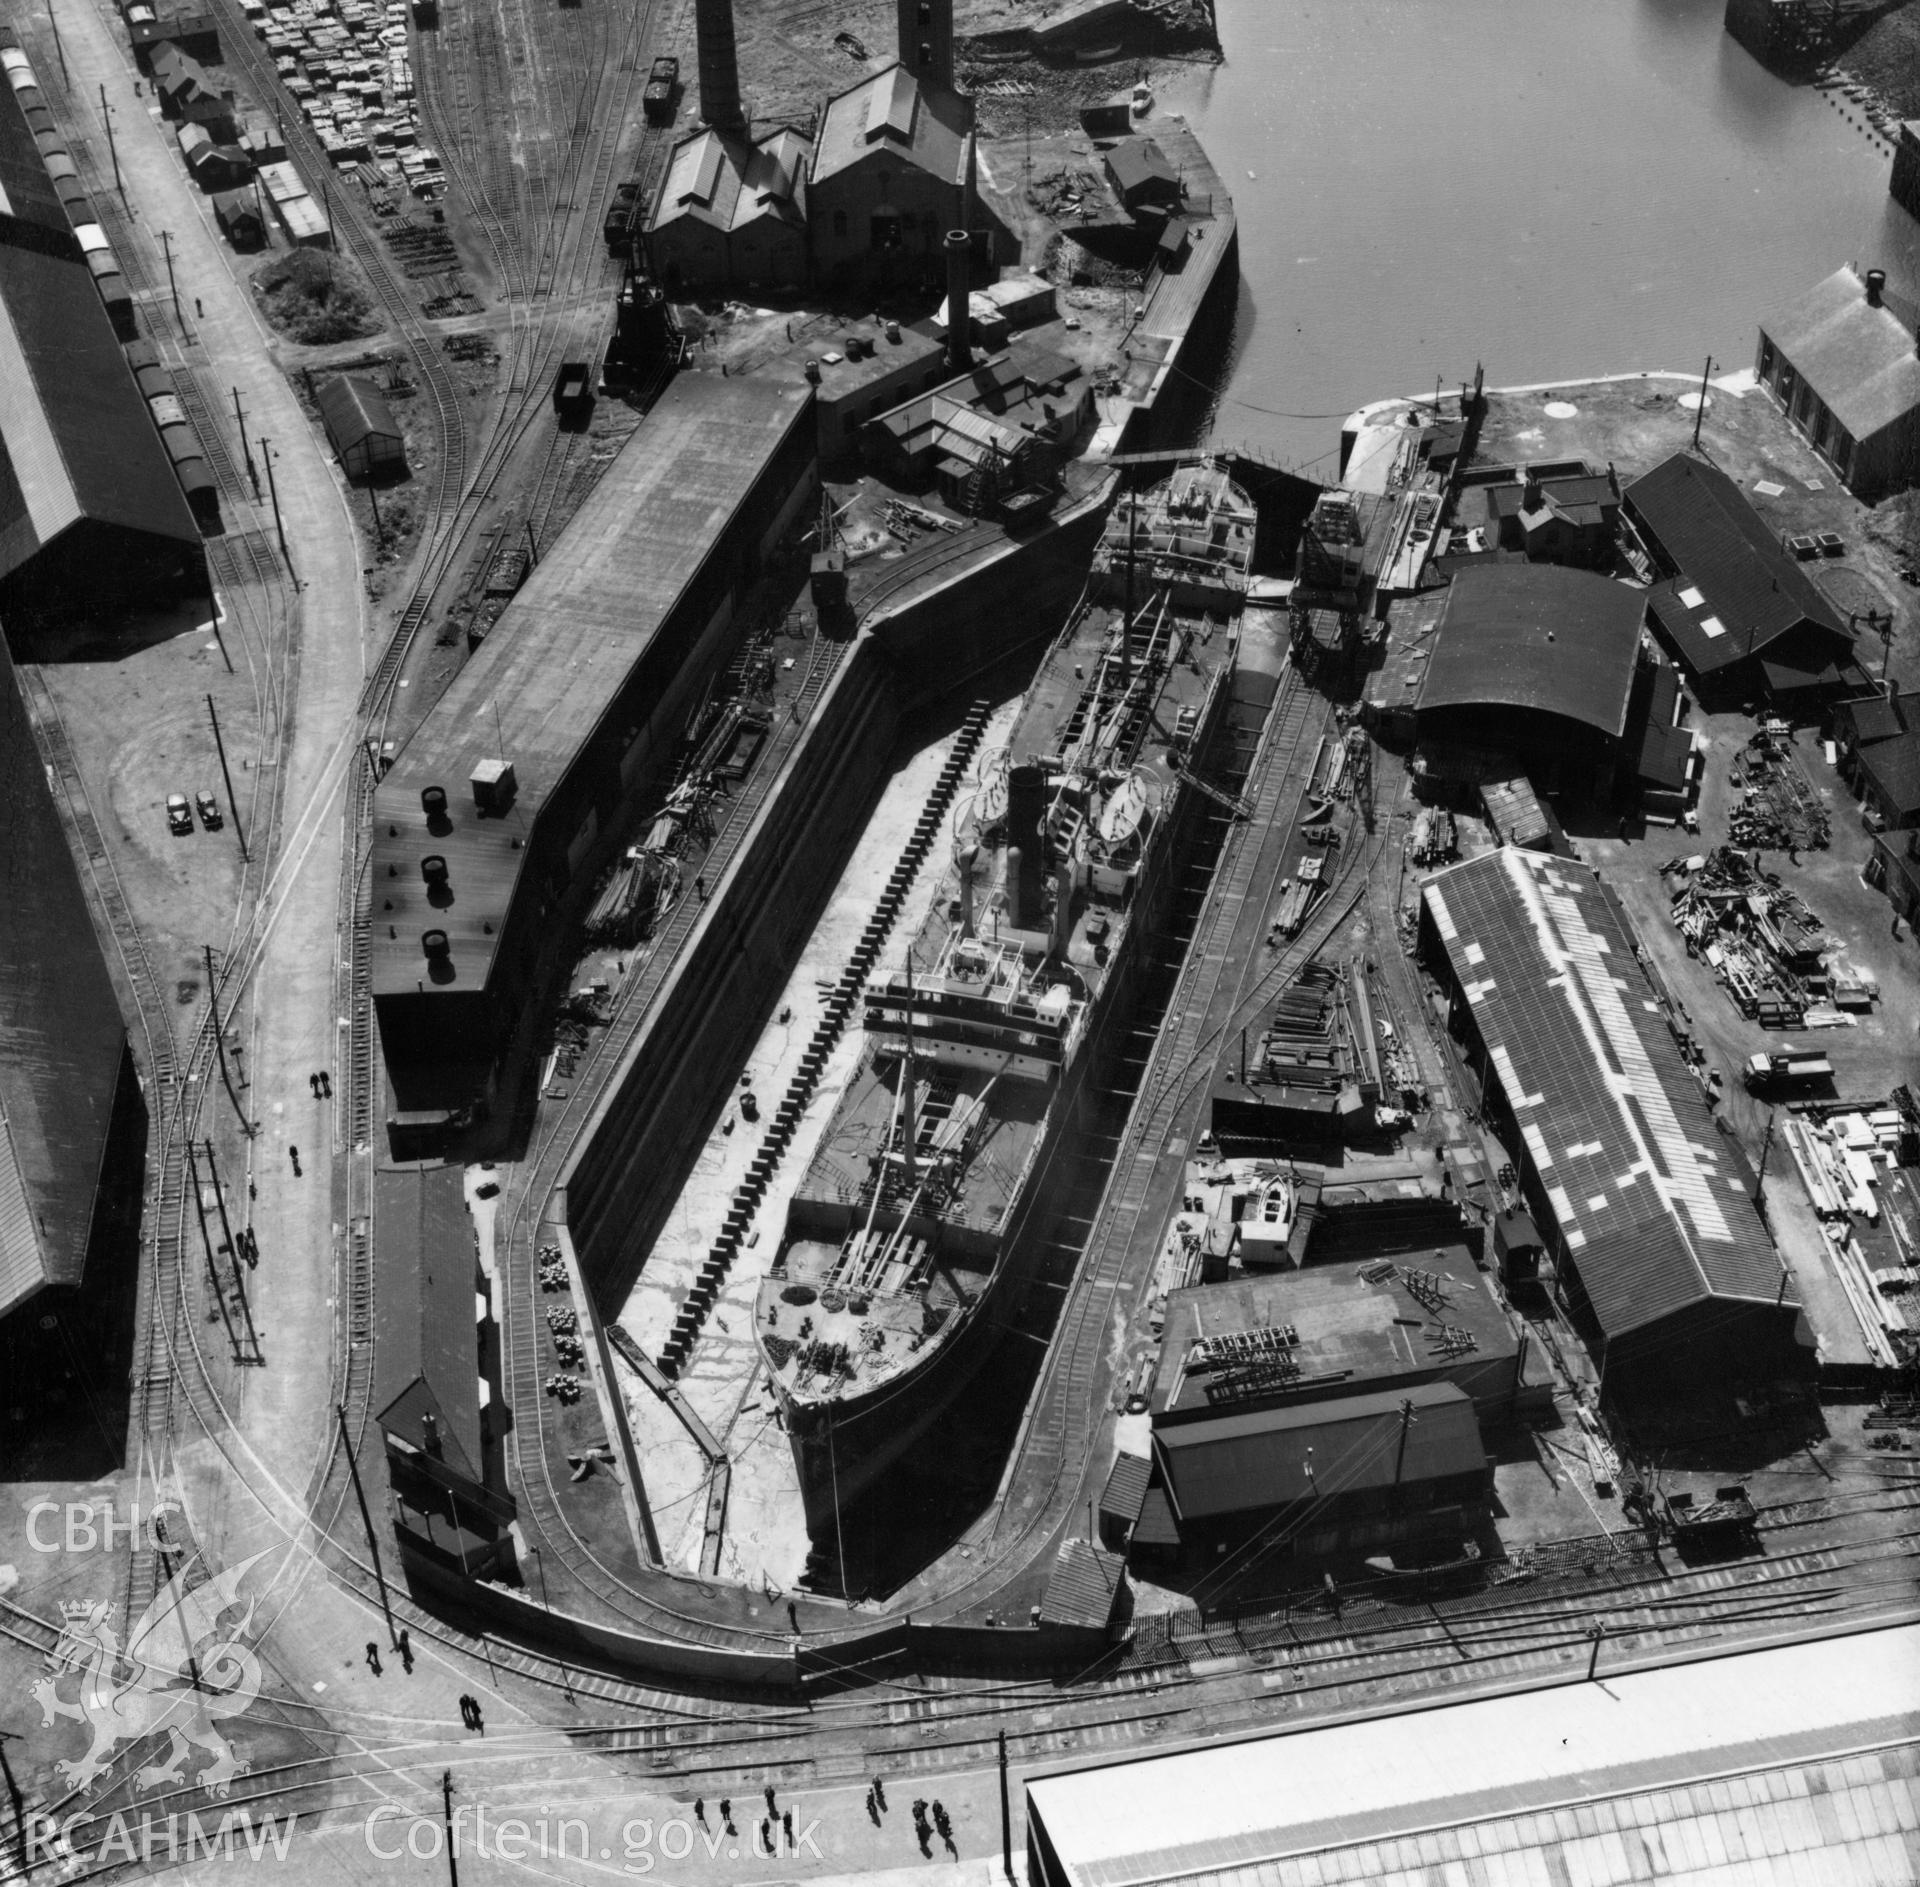 View of Prince of Wales dry dock, Swansea, showing the ship 'Pendeen' in dry dock. Oblique aerial photograph, 5?" cut roll film.